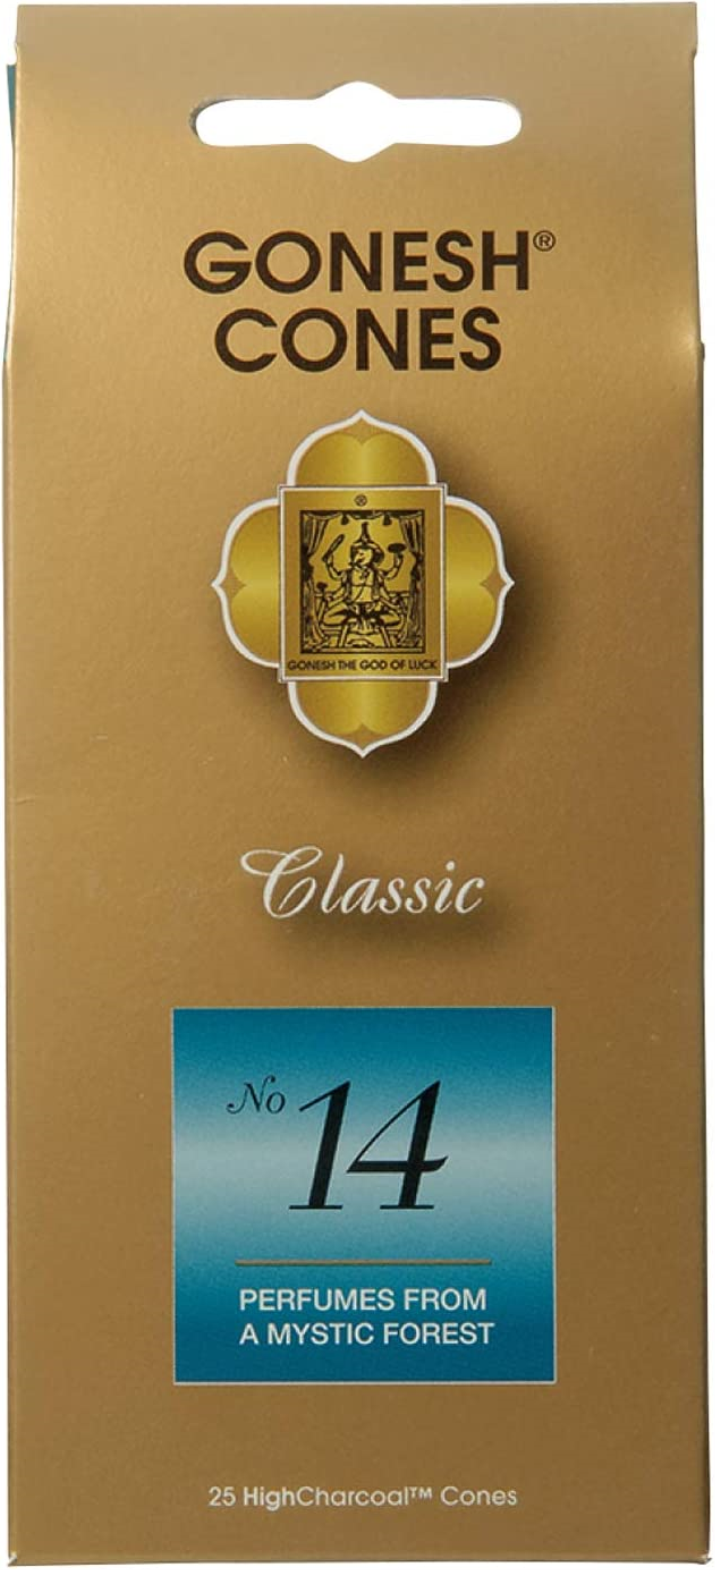 Gonesh Incense Cones Classic Collection 25 Ct. - No. 14